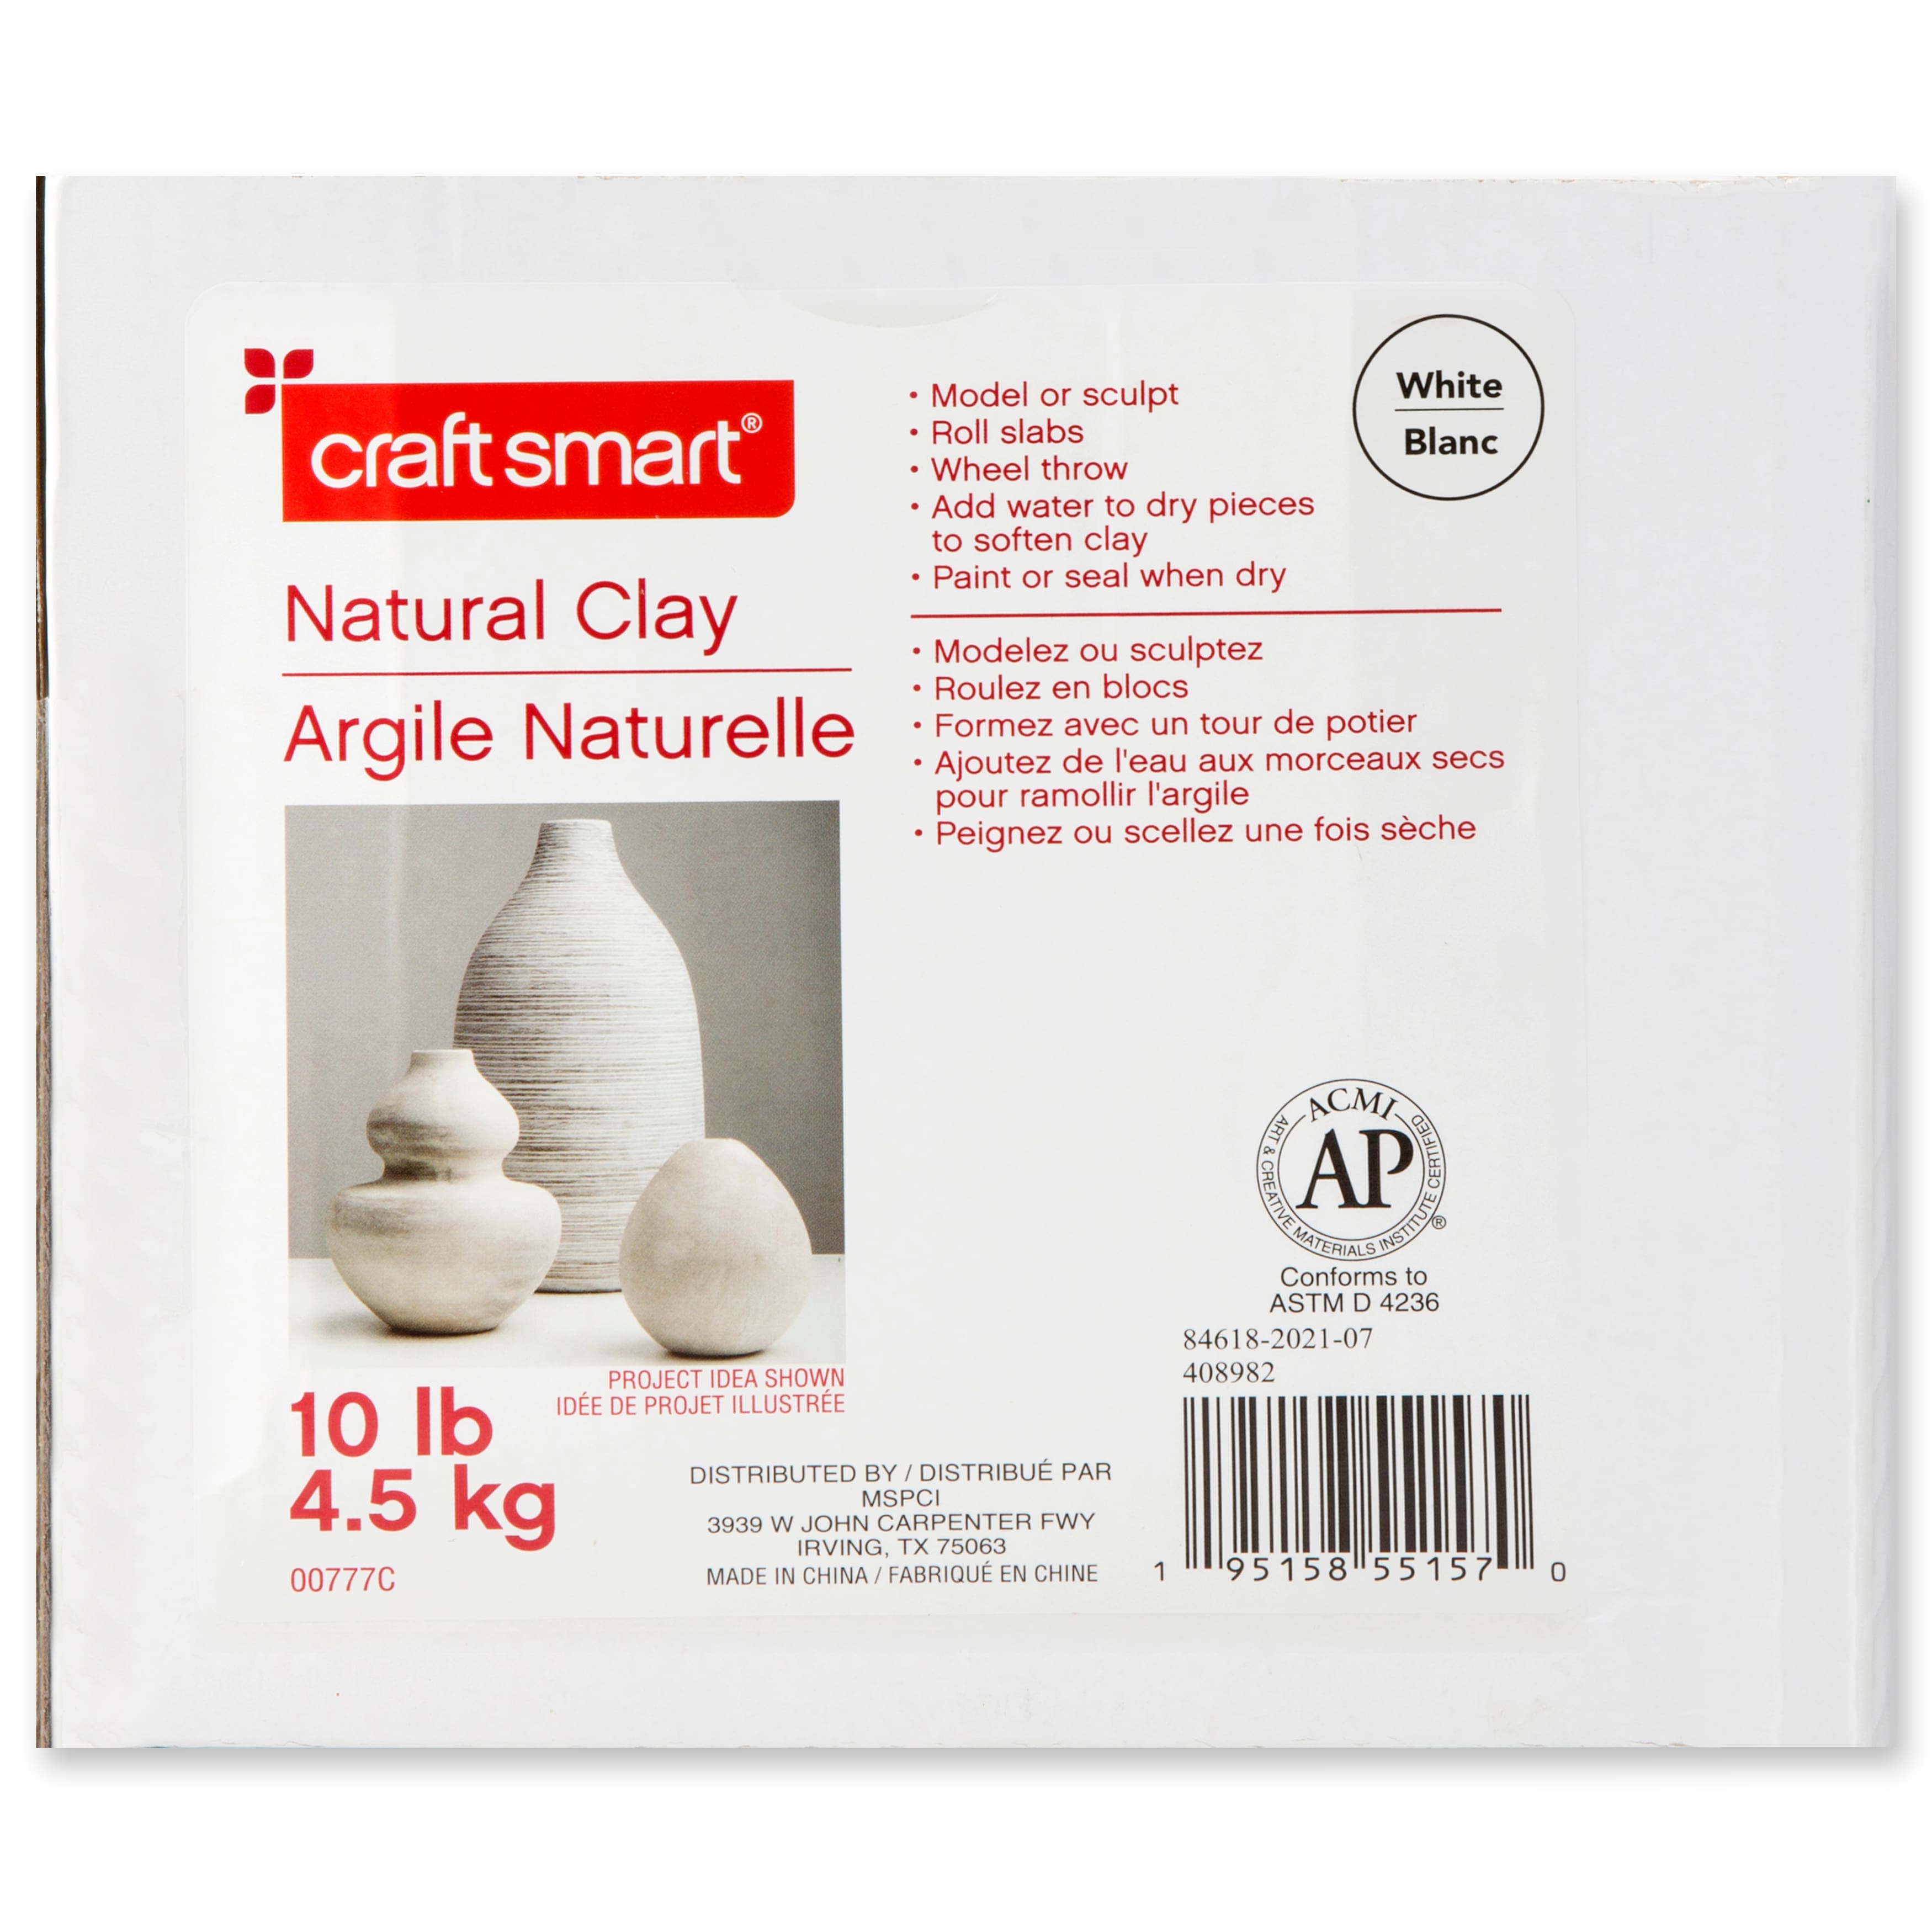 36 Color Air Dry Foam Clay for Sculpting and Cosplay Set - Ultralight, Soft, and Pliable Air Dry Modeling Clay Clay Foam for All Ages - Safe and No